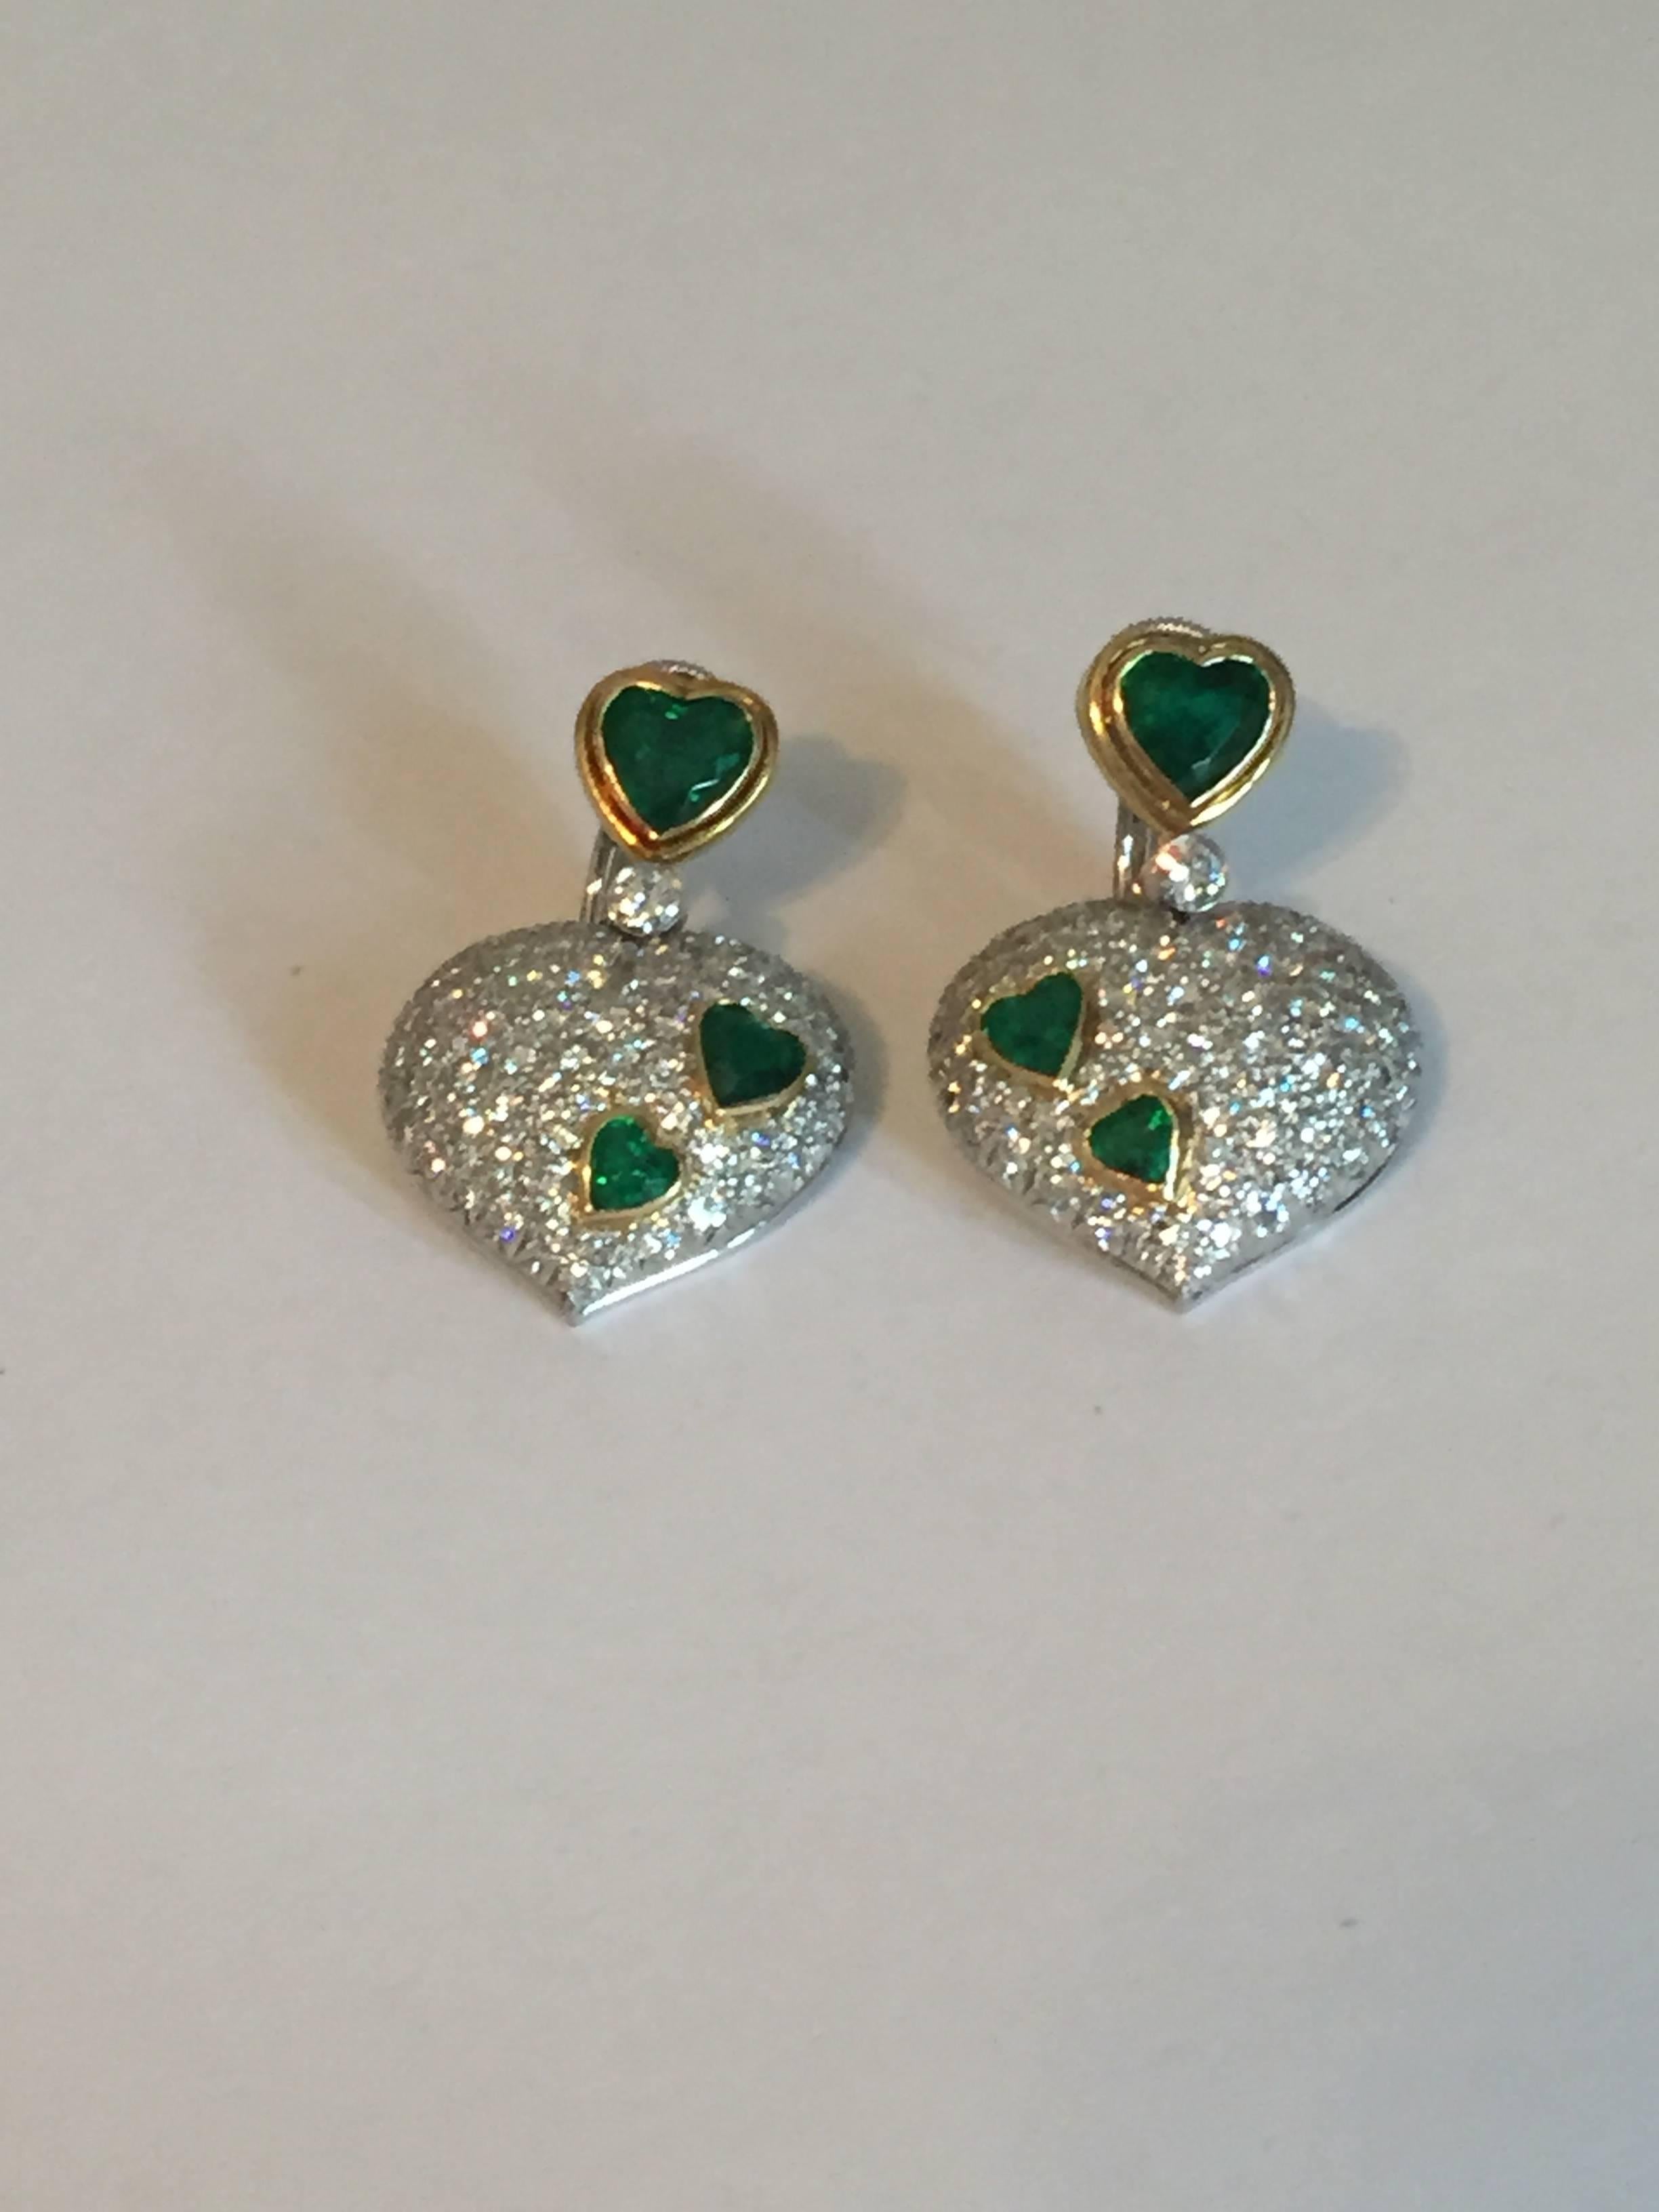 Vintage Harry Winston 18KT white and yellow gold diamond and emerald heart earrings. Earrings contain approximately 7.00CTS. in diamonds and approximately  5.00CTS. in emeralds. Diamonds are E - F in color and VVS - VS in clarity. Earrings weigh